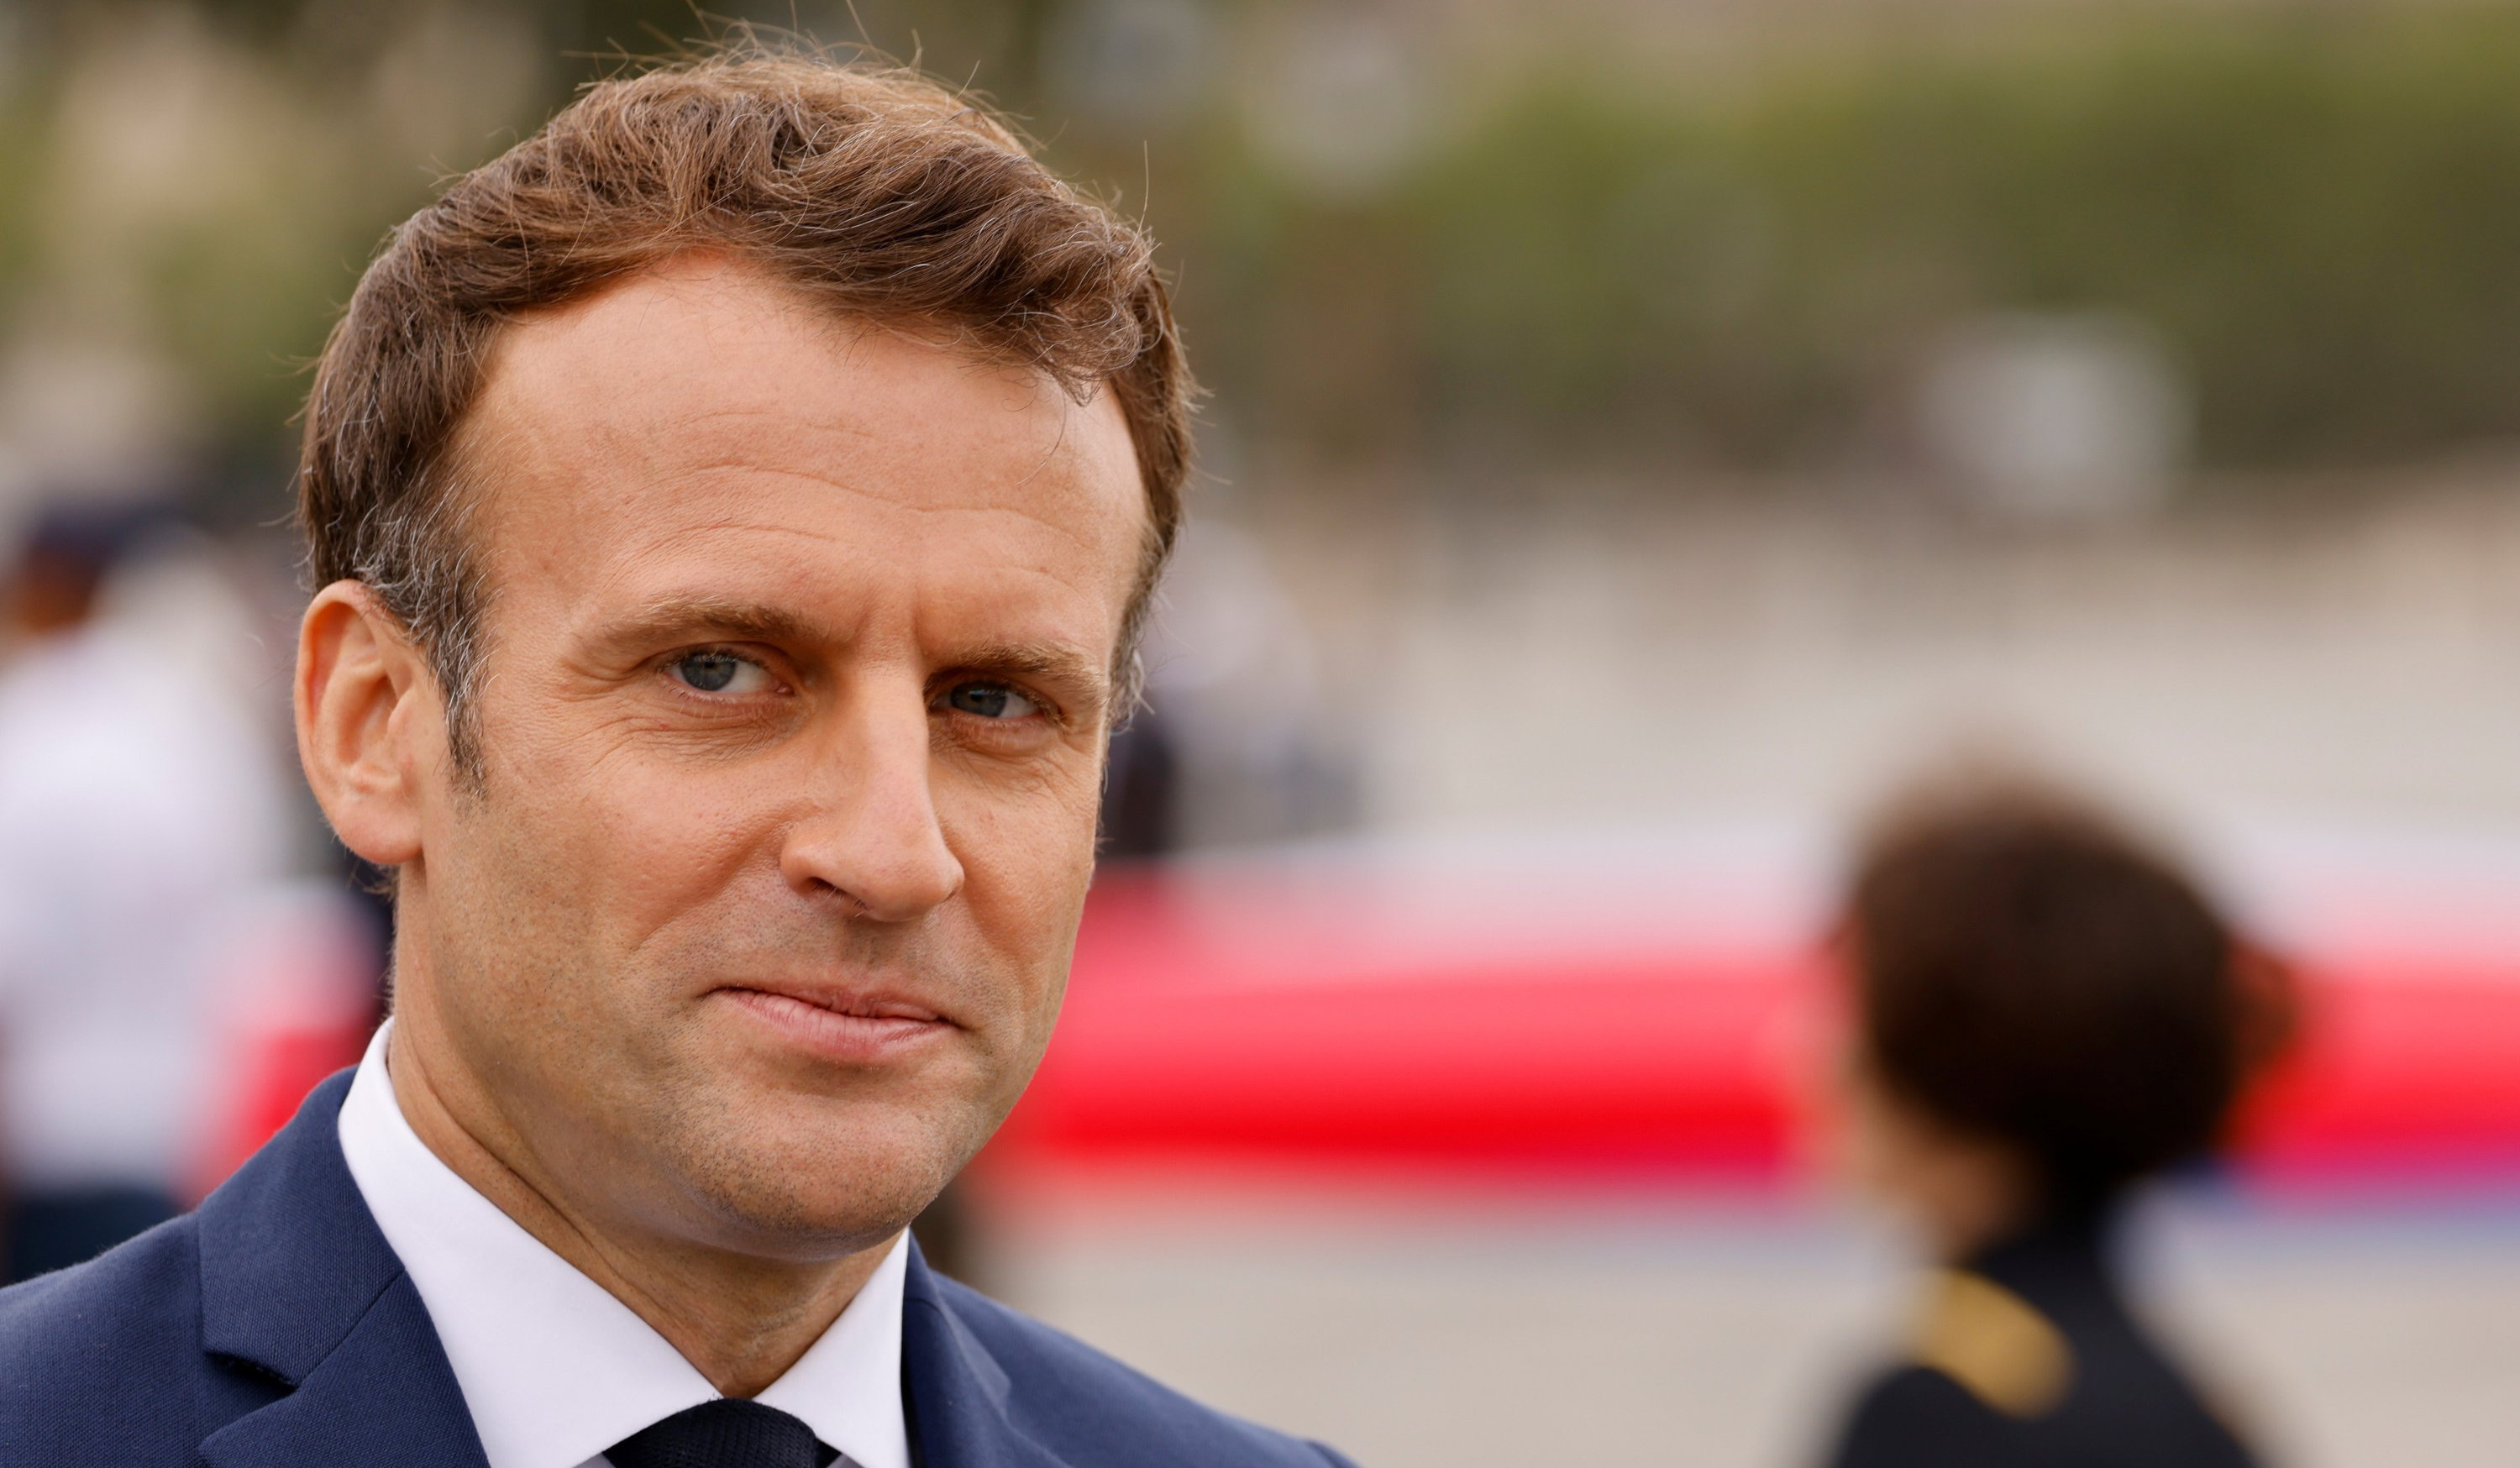 Macron says France will build new nuclear energy reactors